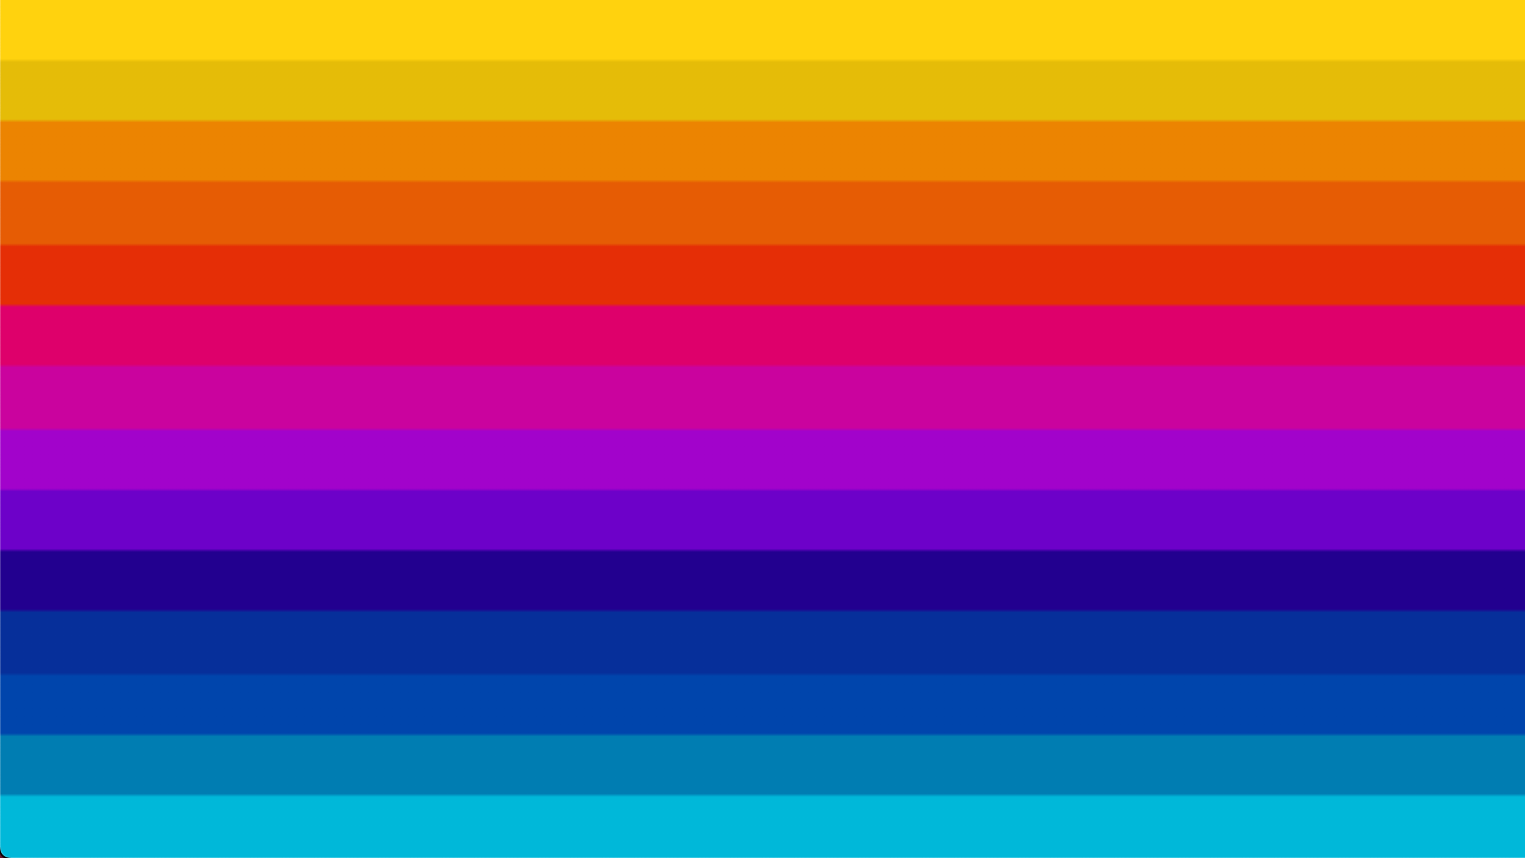 Pure CSS gradient horizontal striped background using hard stops, ranging from yellow at the top, through to orange, red, pink, purple, dark blue and bright blue.